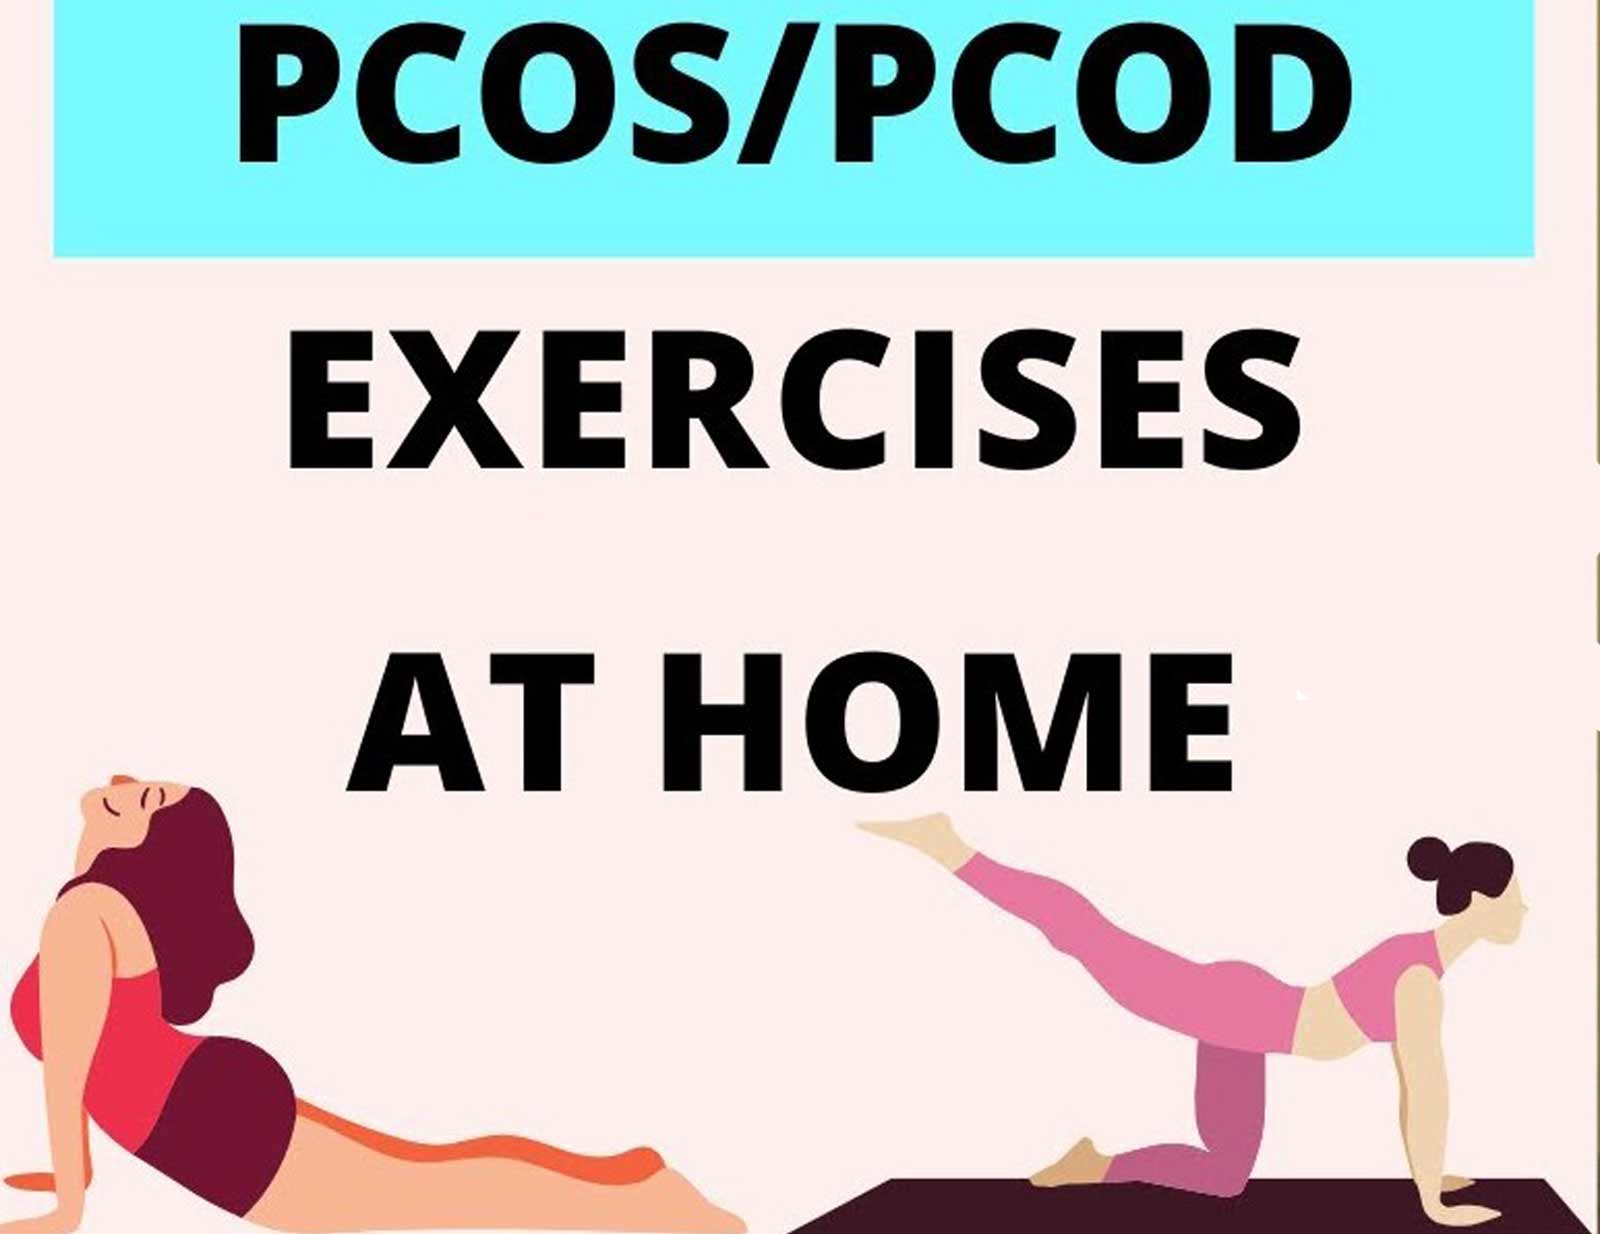 PCOS/PCOD EXERCISES WEIGHT LOSS With PCOS/PCOD EXERCISES AT HOME FOR ...